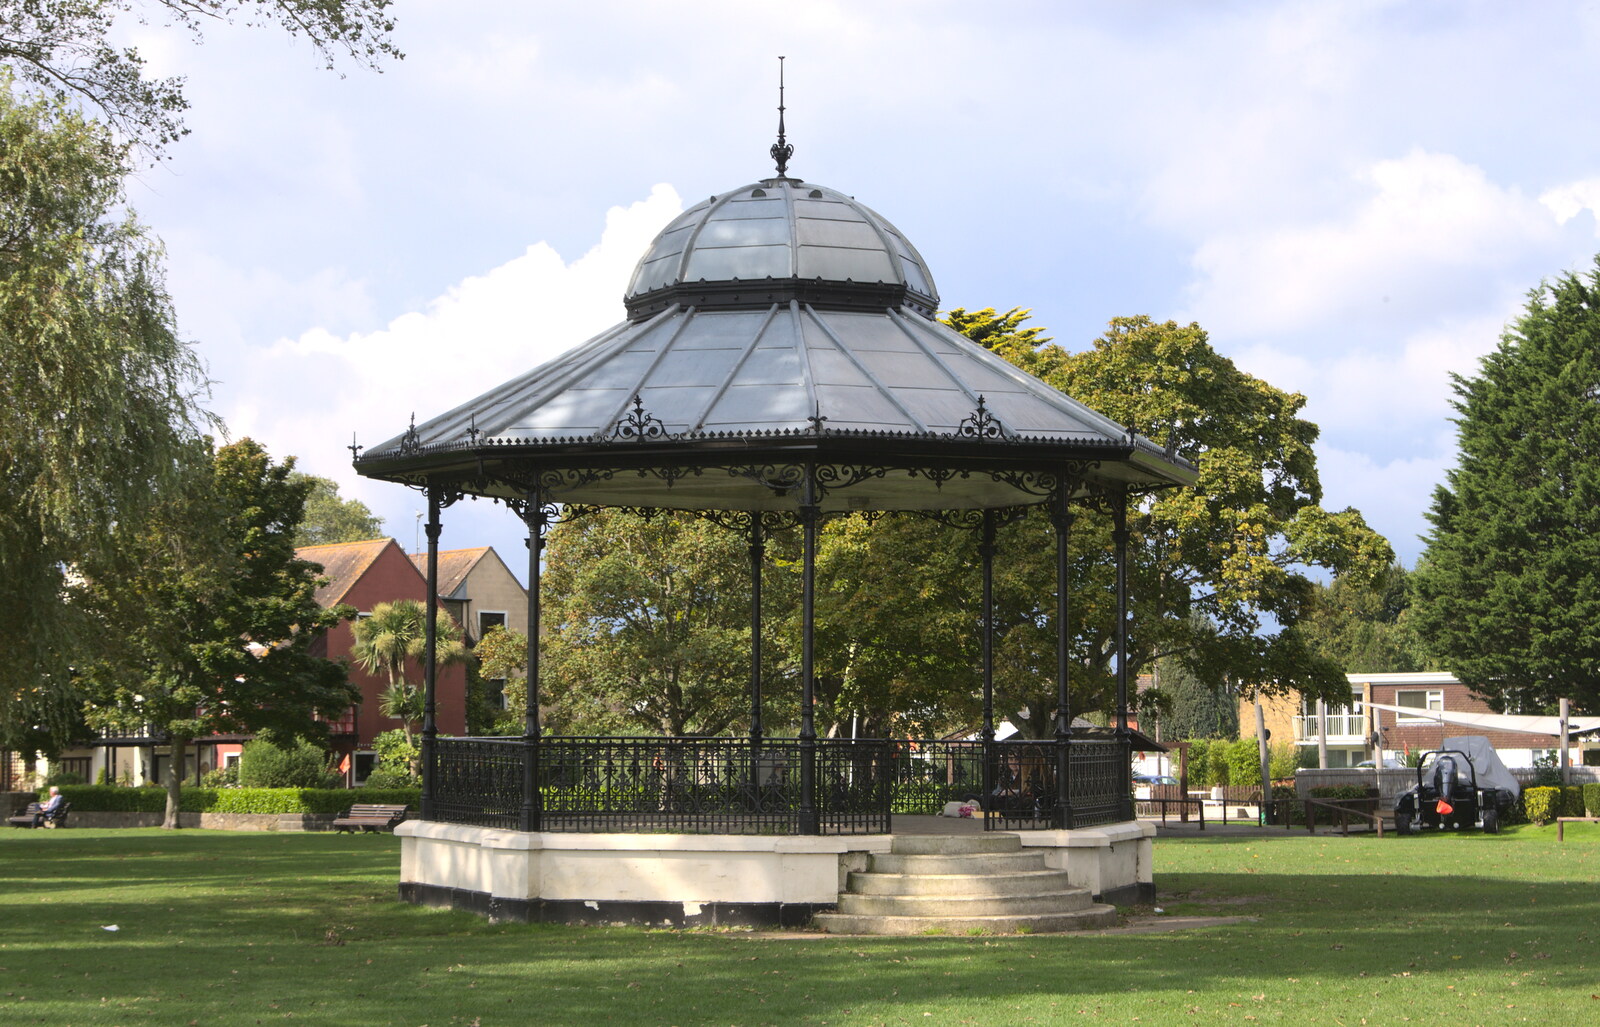 The bandstand in Christchurch Park from Grandmother's Wake, Winkton, Christchurch, Dorset - 18th September 2017